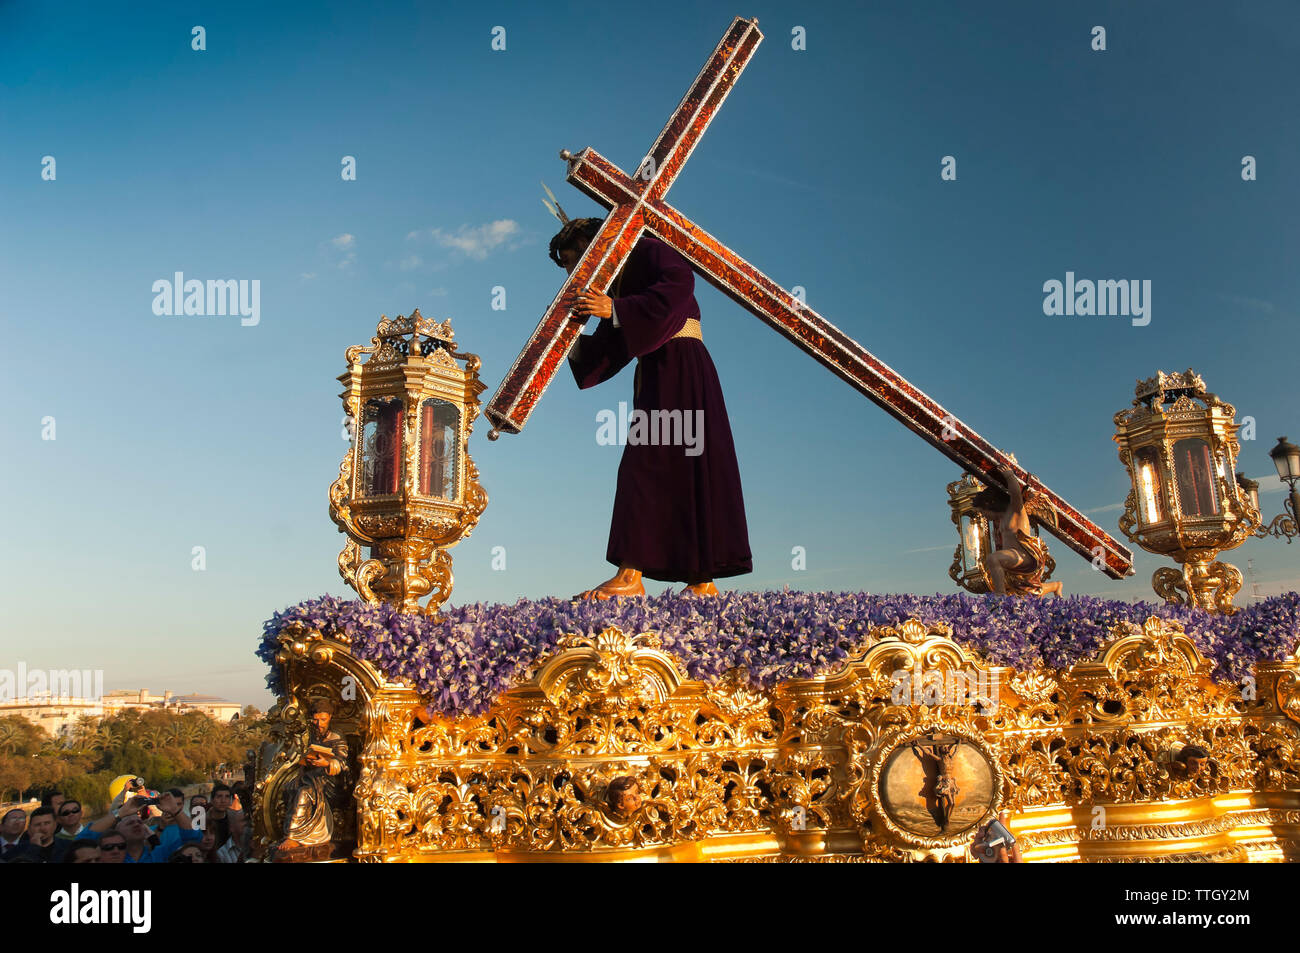 Holy Week. Brotherhood of La O (Jesus Nazareno carrying the cross). Seville. Region of Andalusia. Spain. Europe Stock Photo